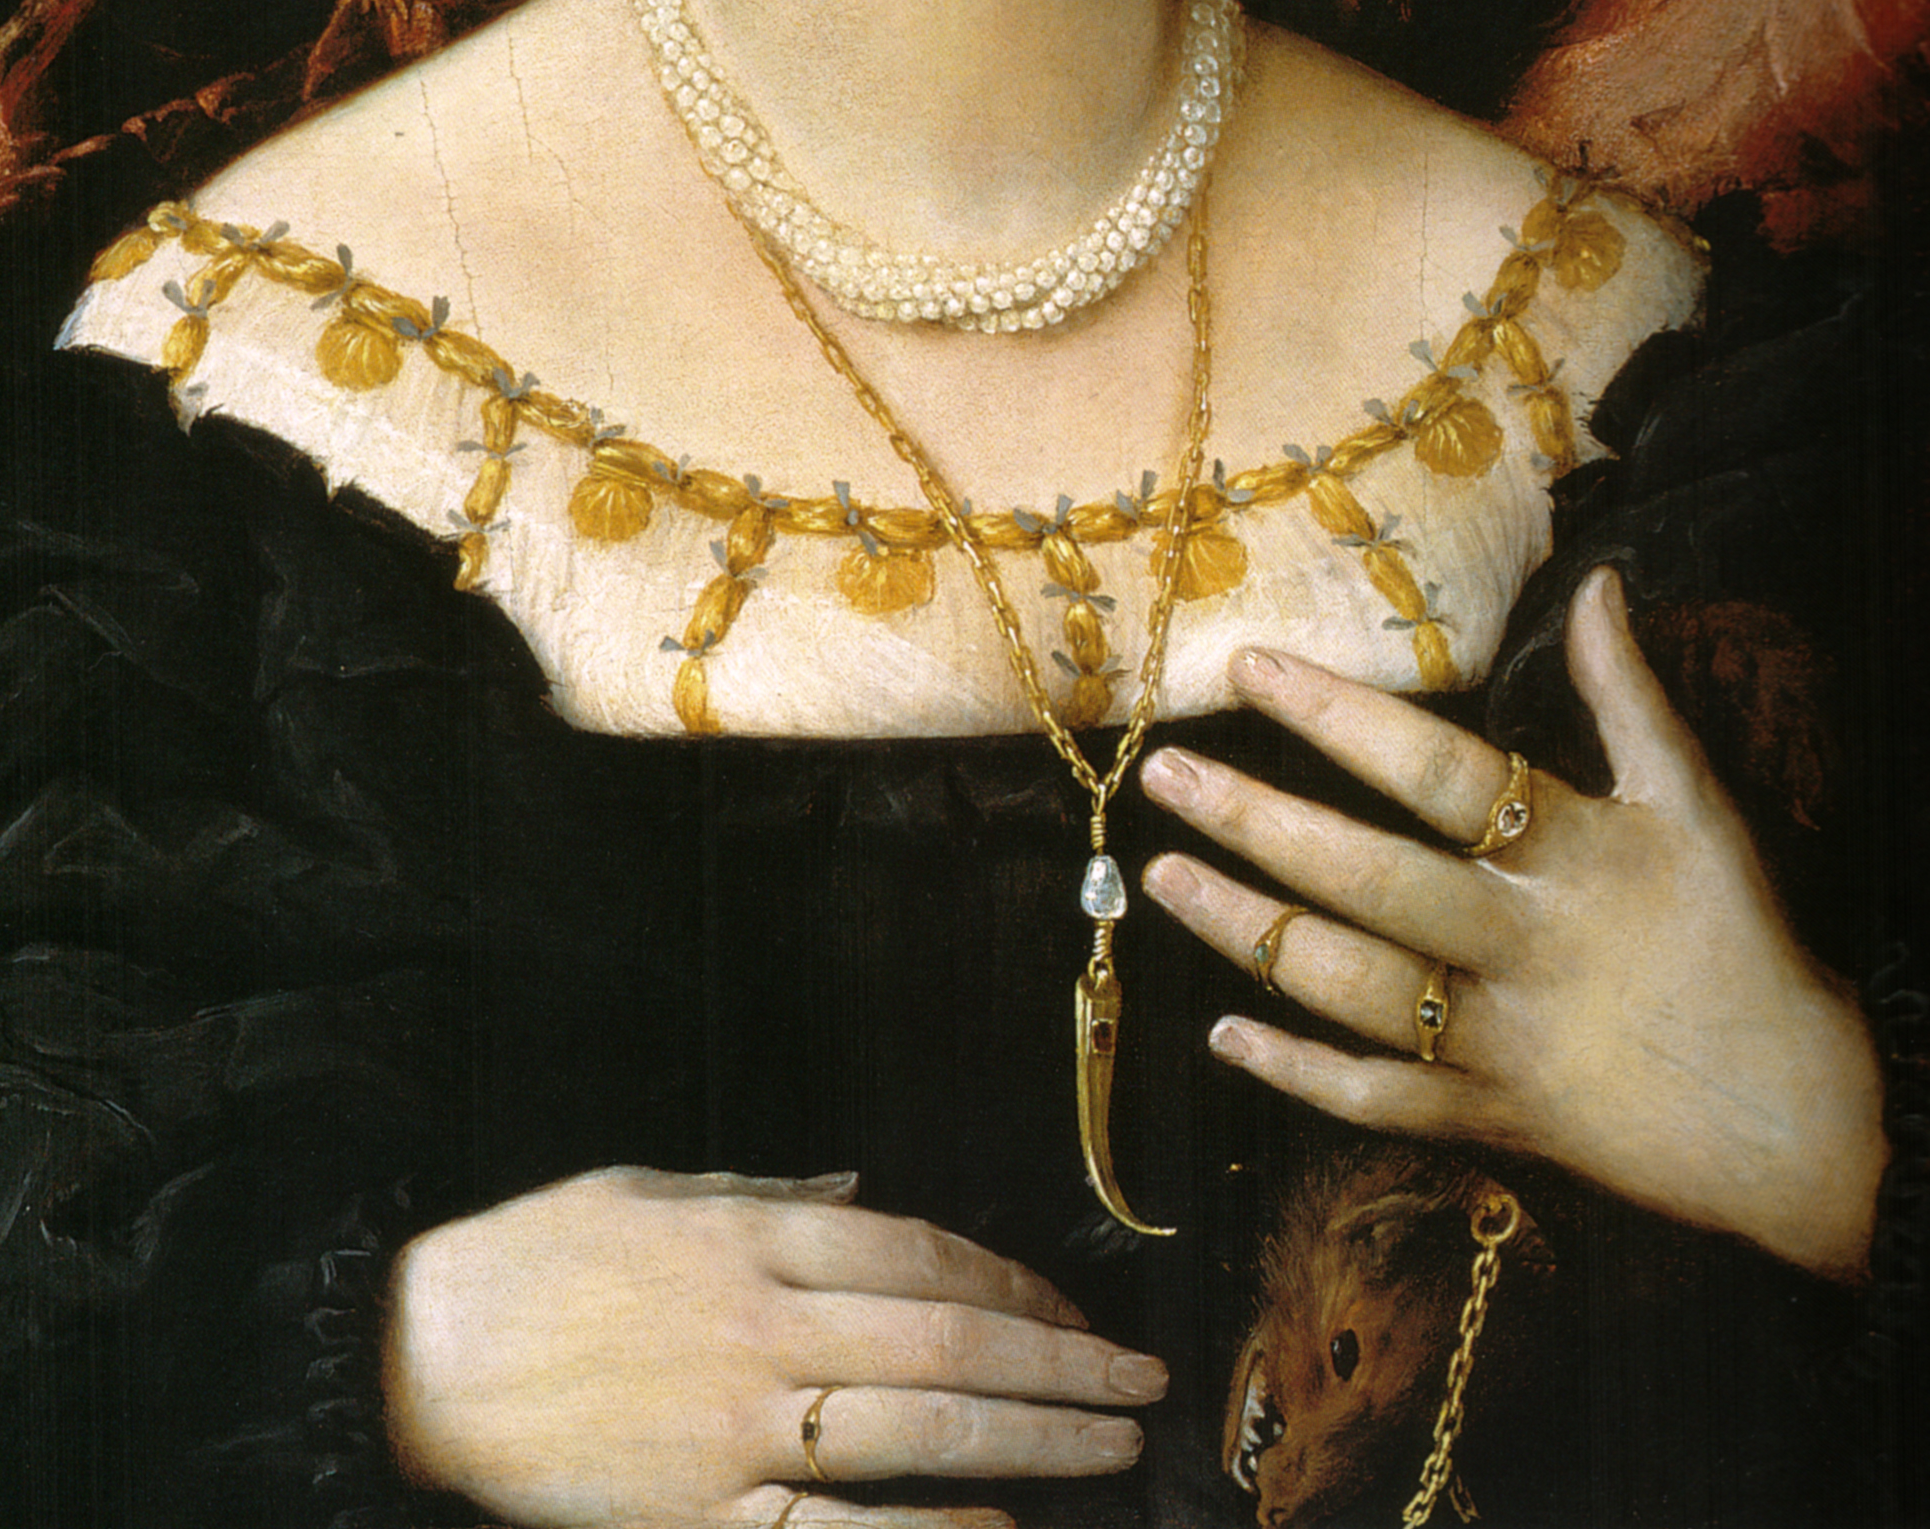 The weasel was a fertility talisman in the Renaissance. It was believed that the animal conceived through the ears and gave birth through the mouth. A “miraculous” conception reminiscent of the Virgin Mary. Portrait of Lucina Brembati by Lorenzo Lotto, 1518. 